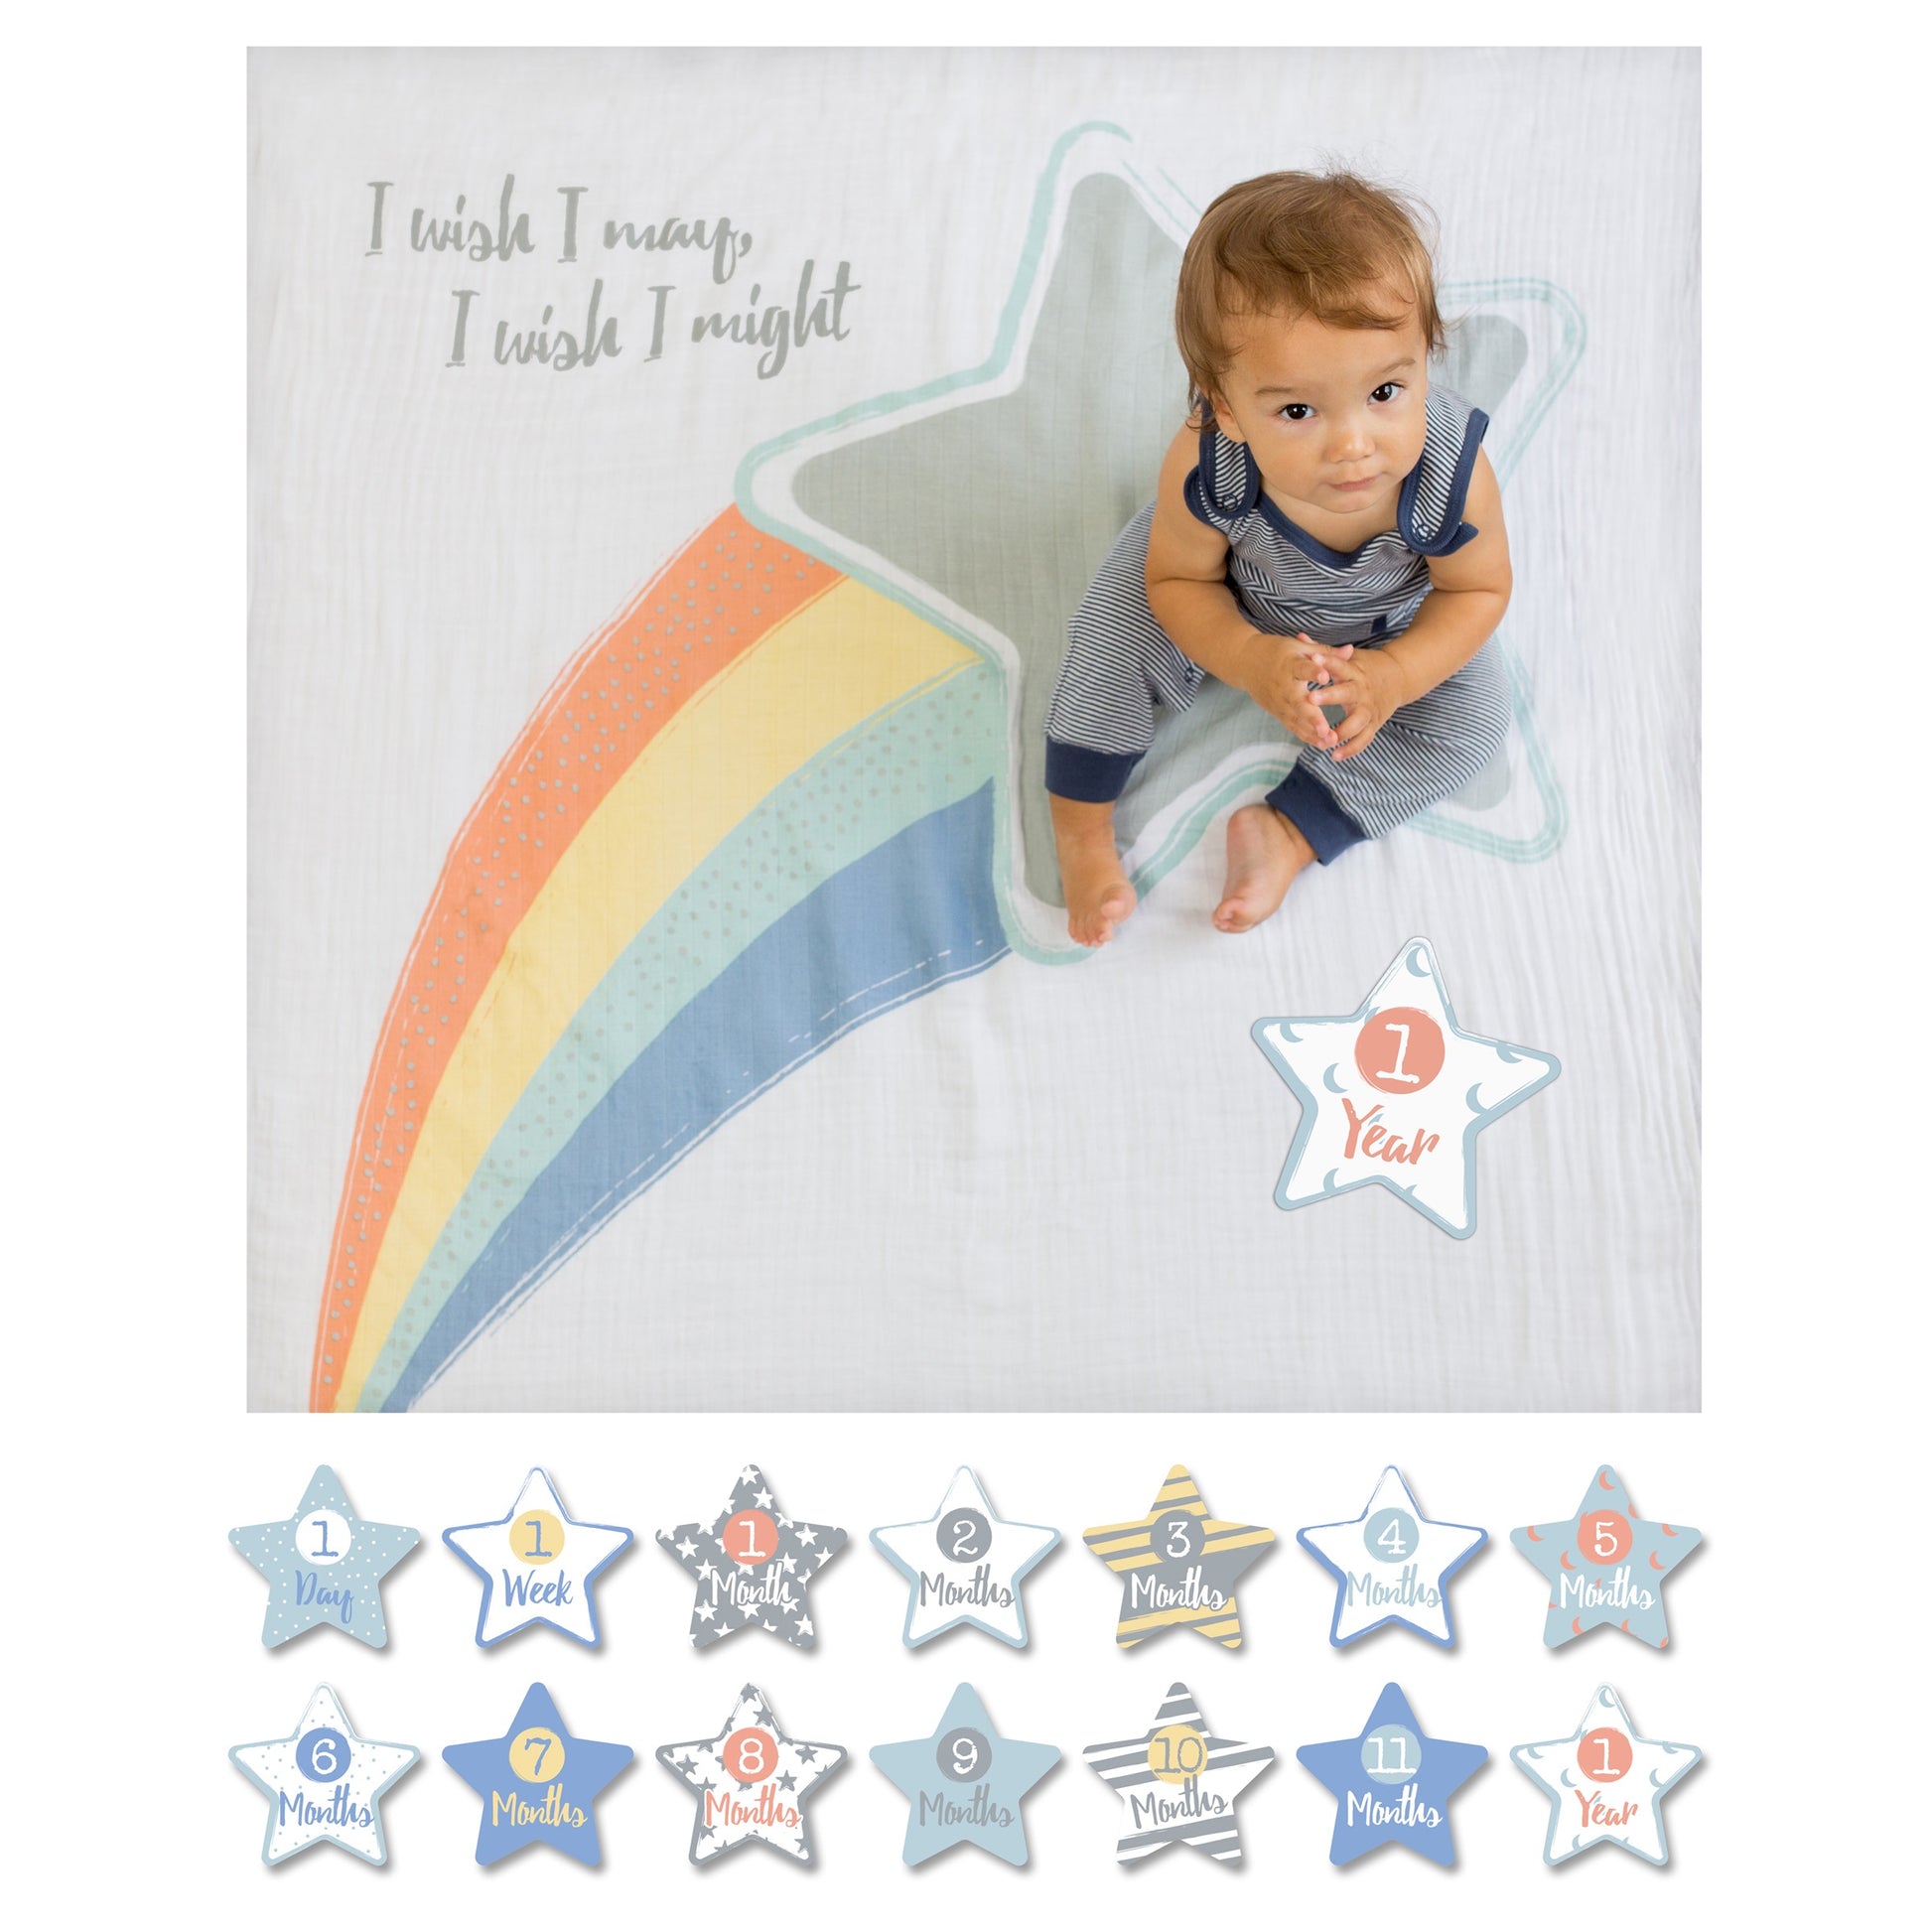 I Wish I May Baby’s First Year Blanket and Cards Set I Wish I May - Doodlebug's Children's Boutique